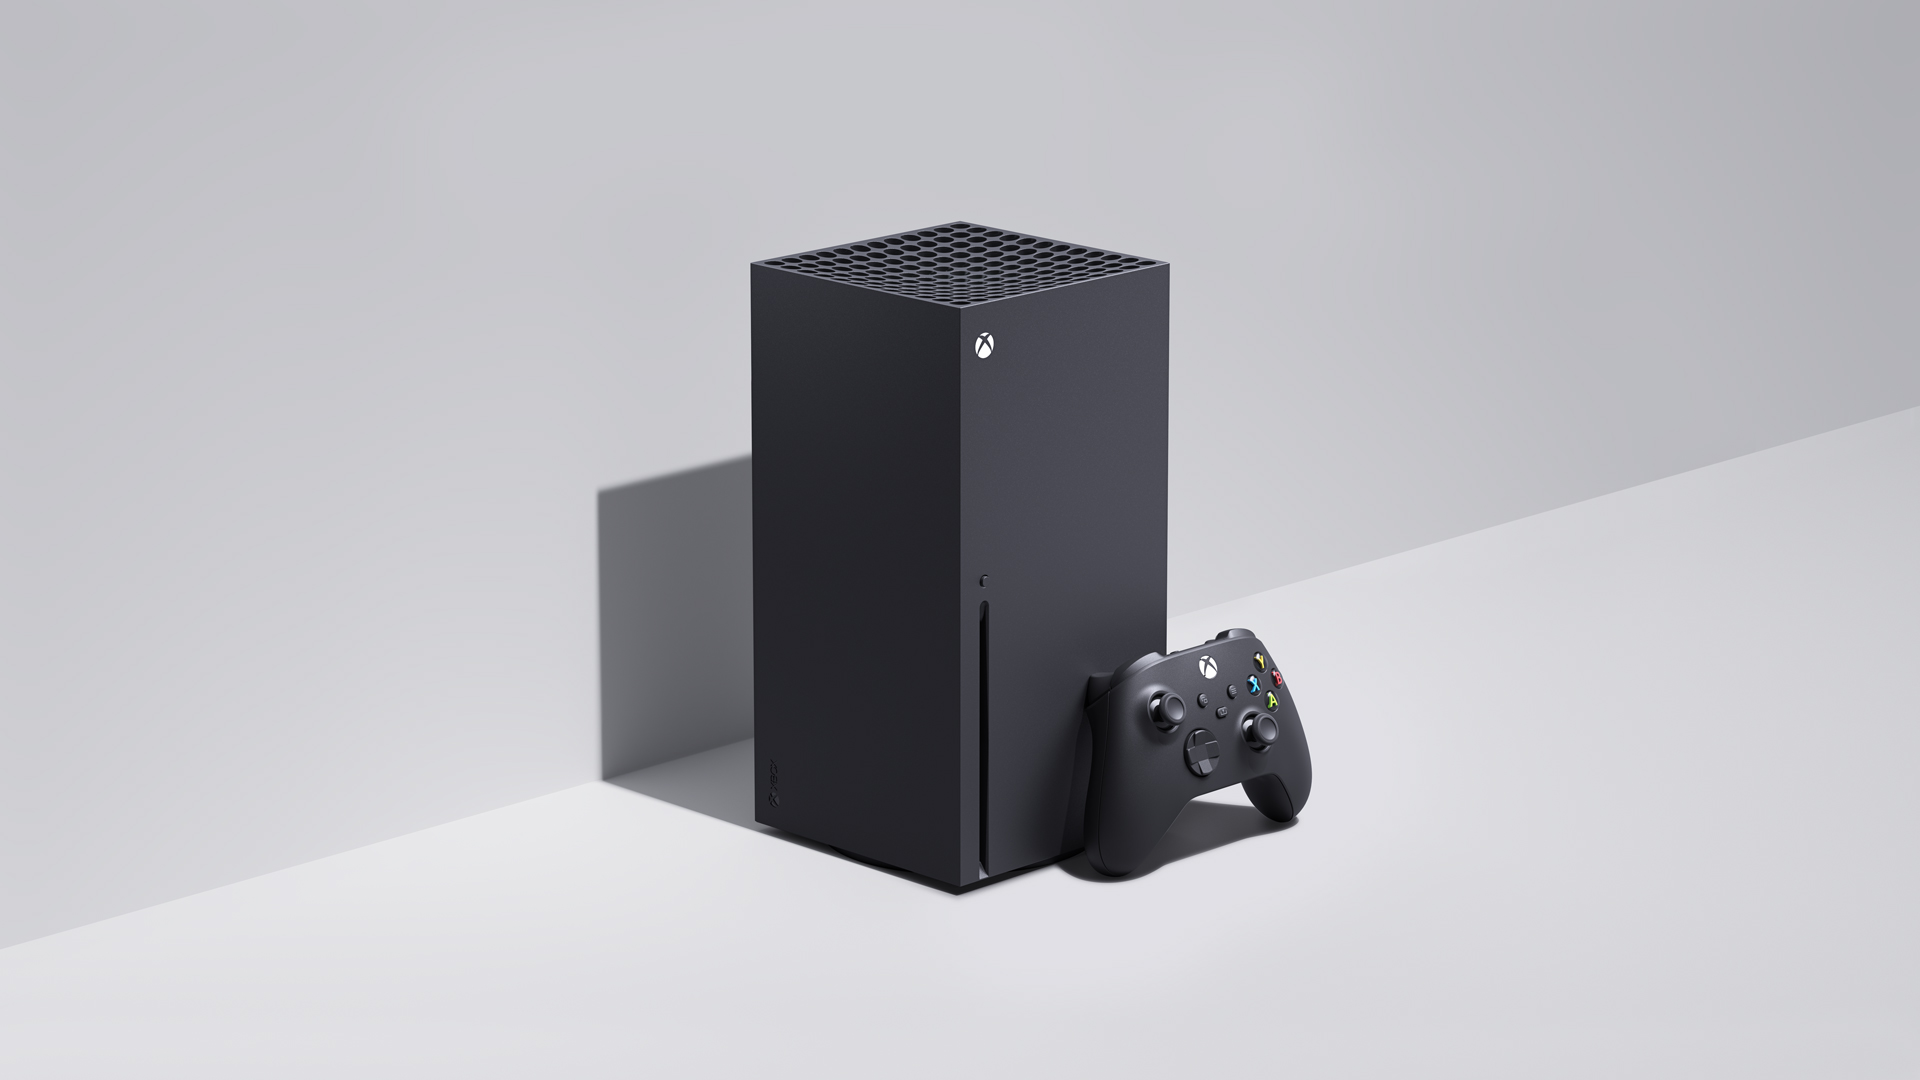 Xbox Series X and Xbox Series S: Designing the Next Generation of Consoles